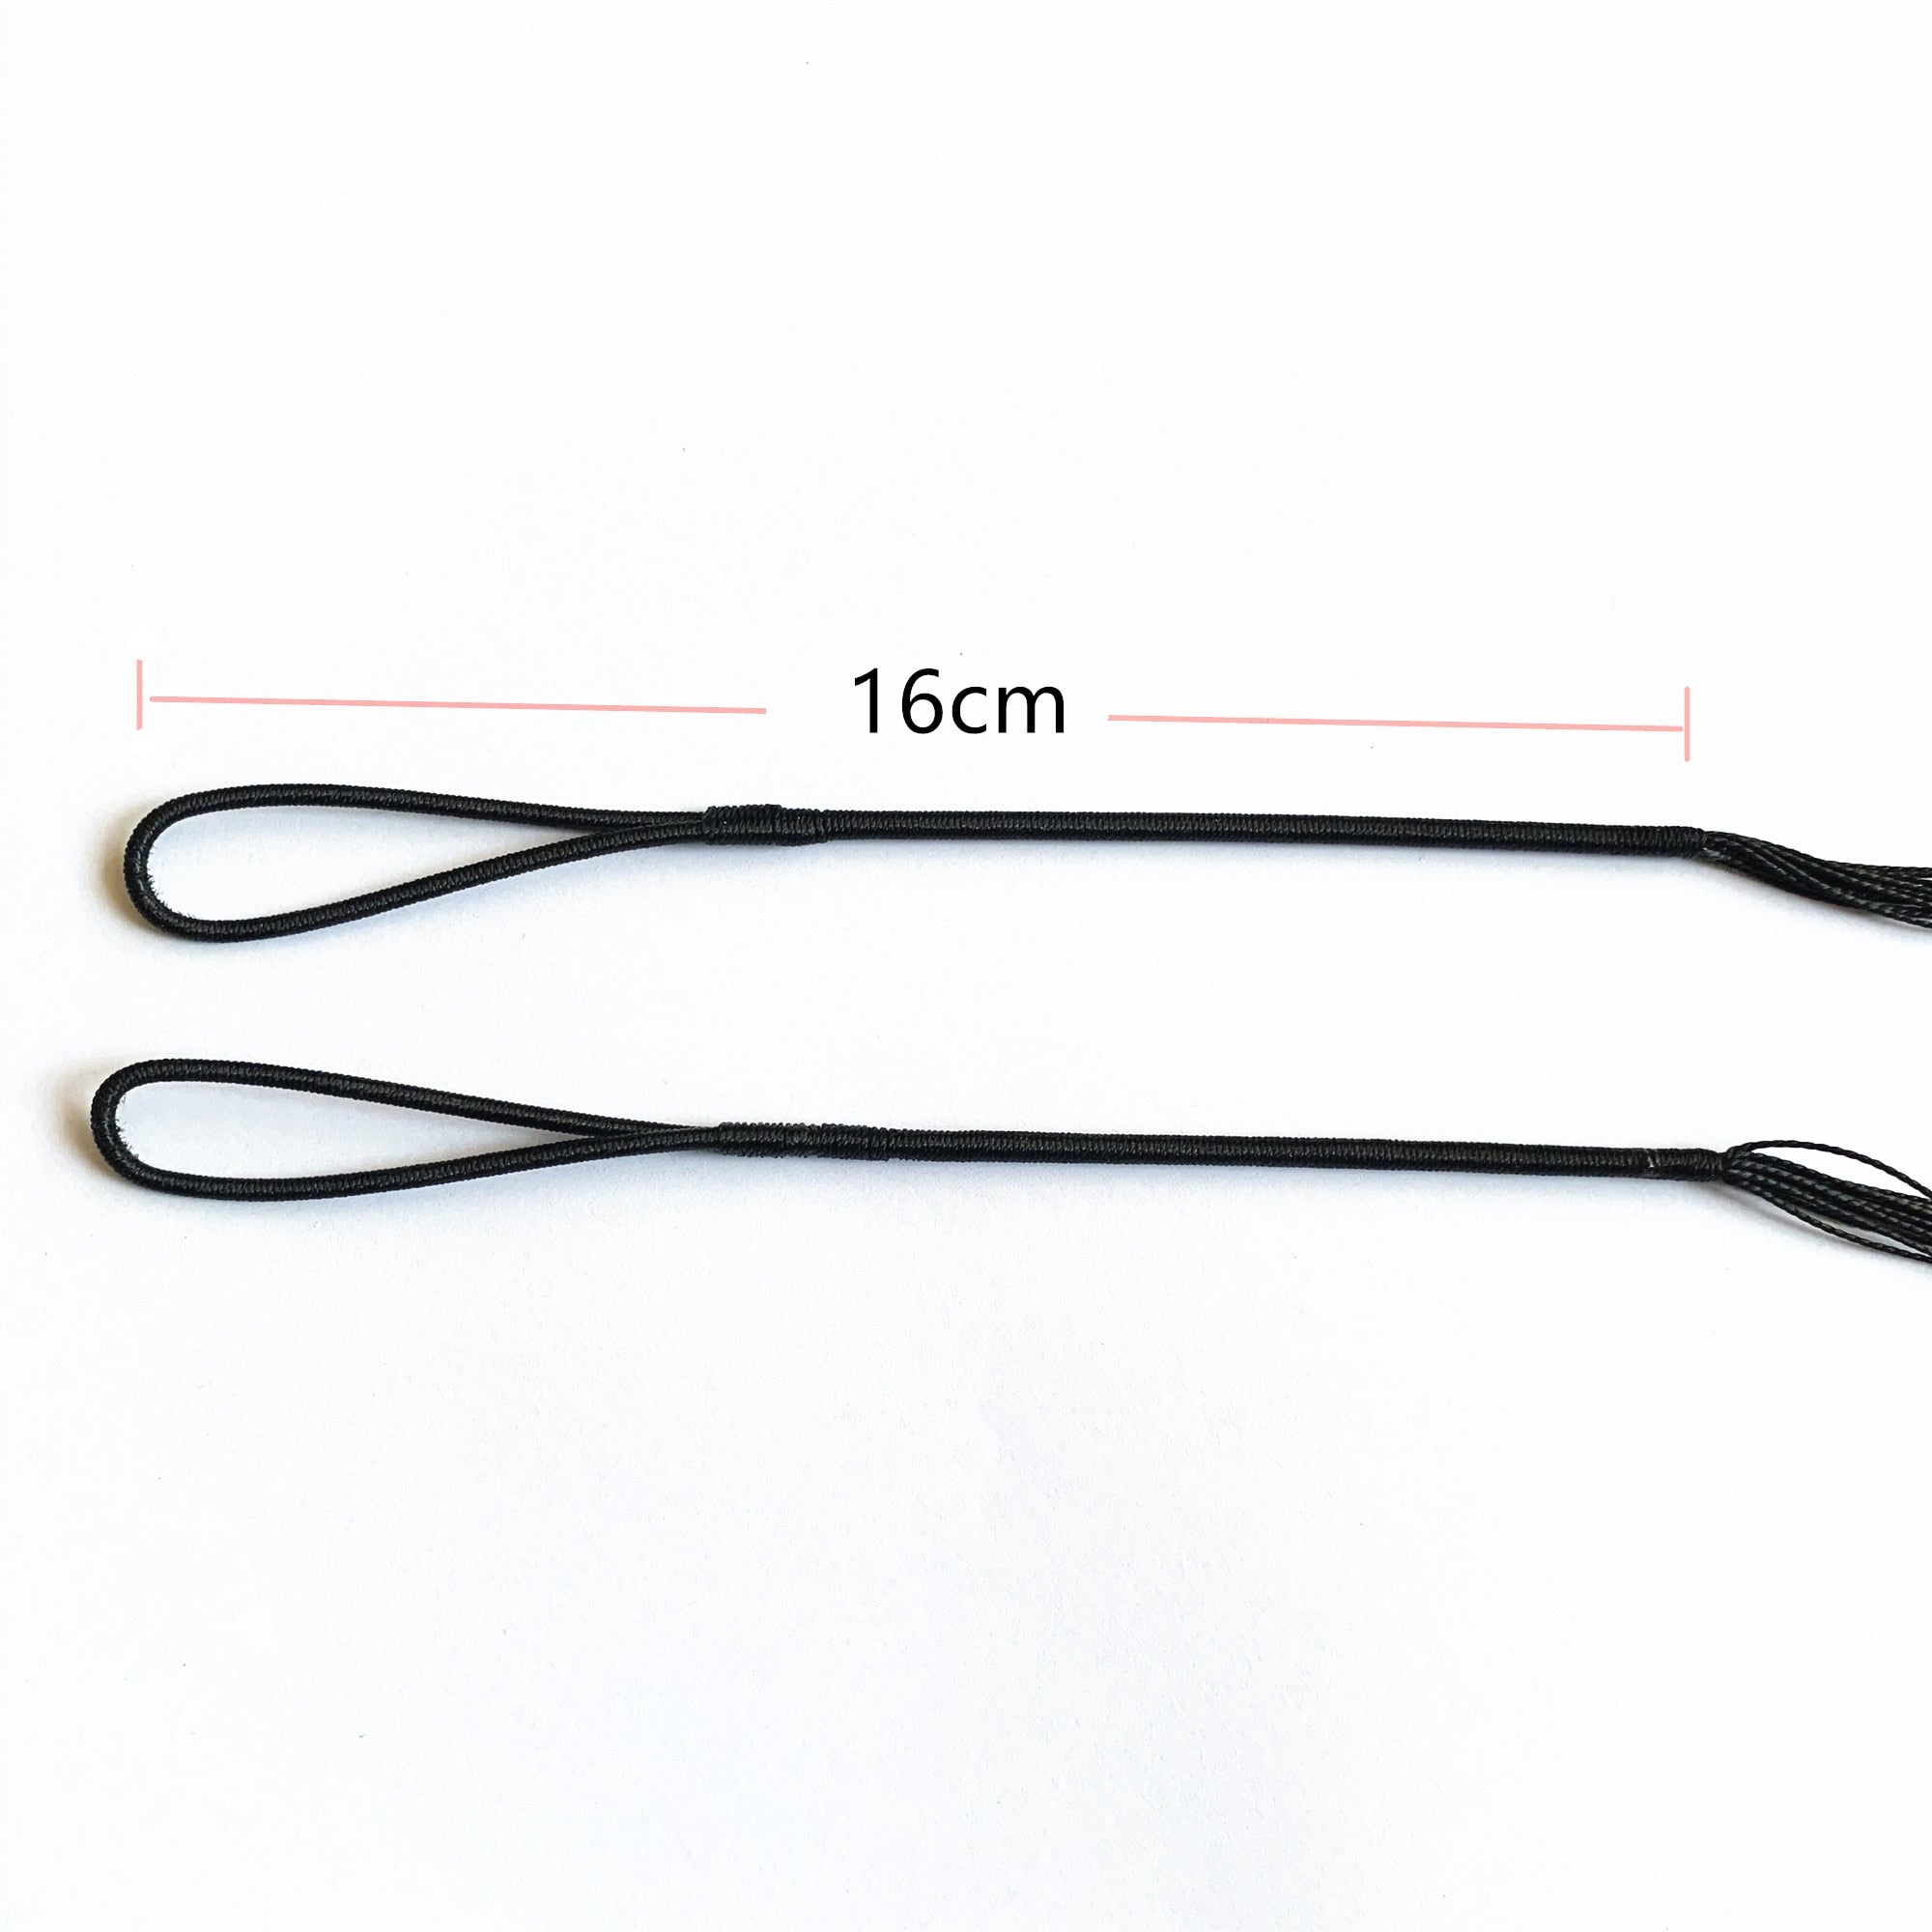 1PCS Black Bow String for Recurve Bow Traditional bowstring Archery Hunting Length 112-180cm